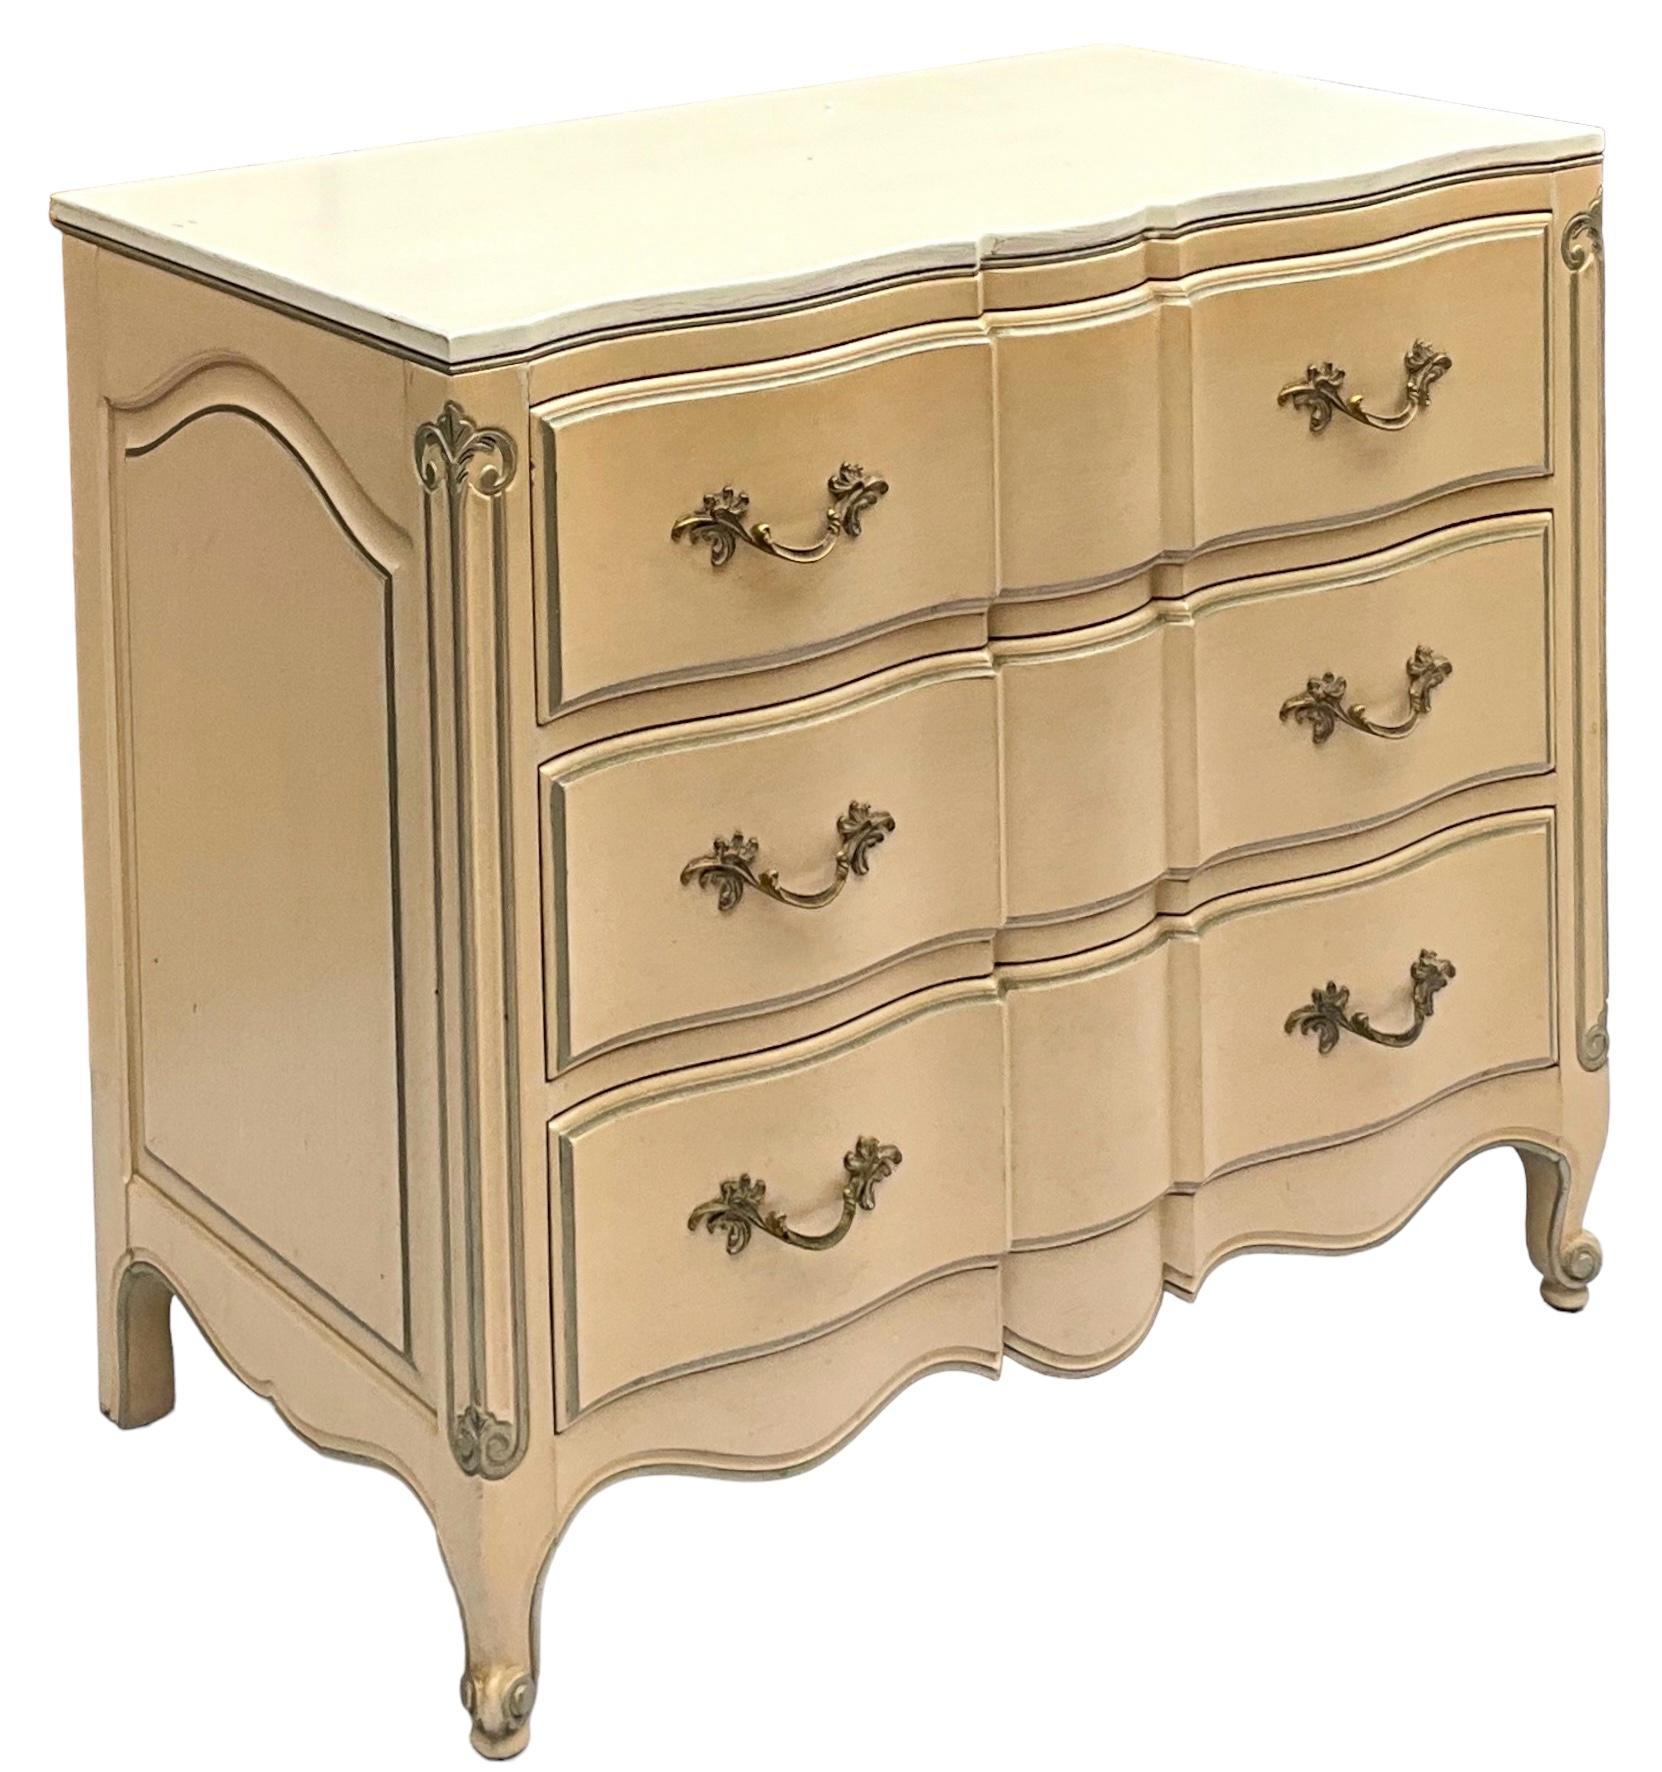 20th Century French Louis XIV Style Custom Painted Chests / Commodes By Dixie - Pair For Sale